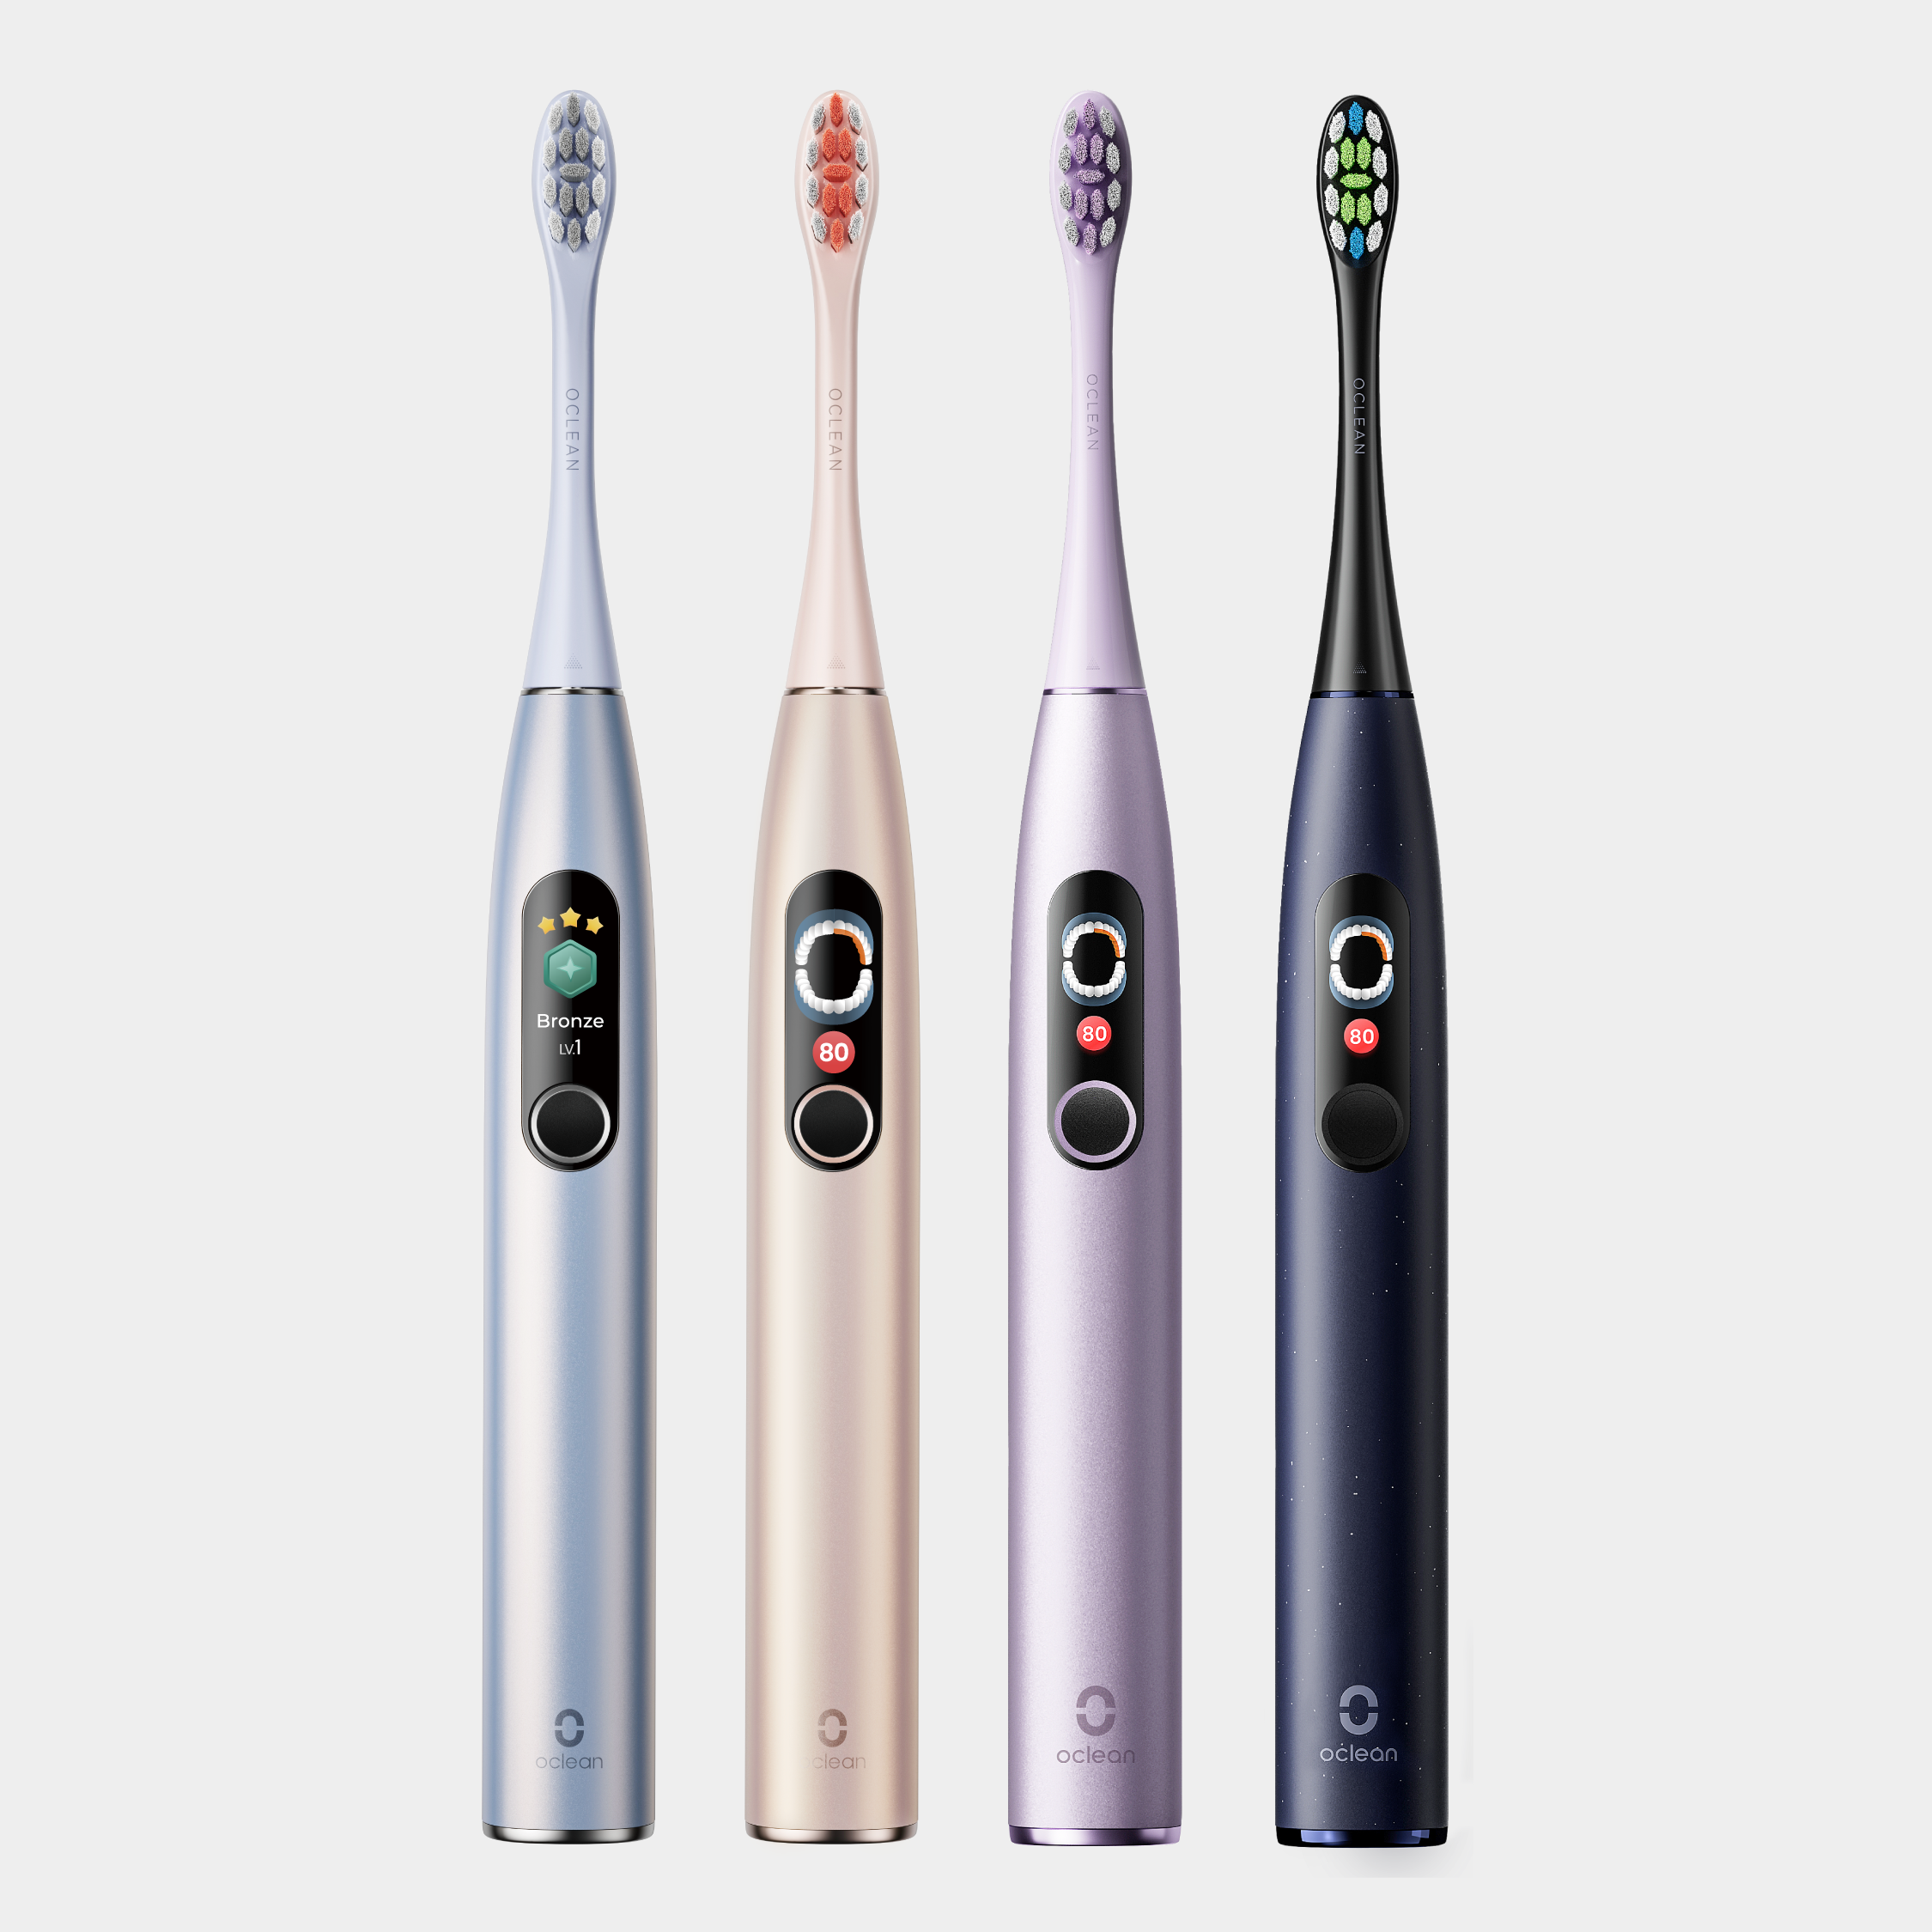 Oclean X Pro Digital Sonic Electric Toothbrush-Toothbrushes-Oclean Official Store